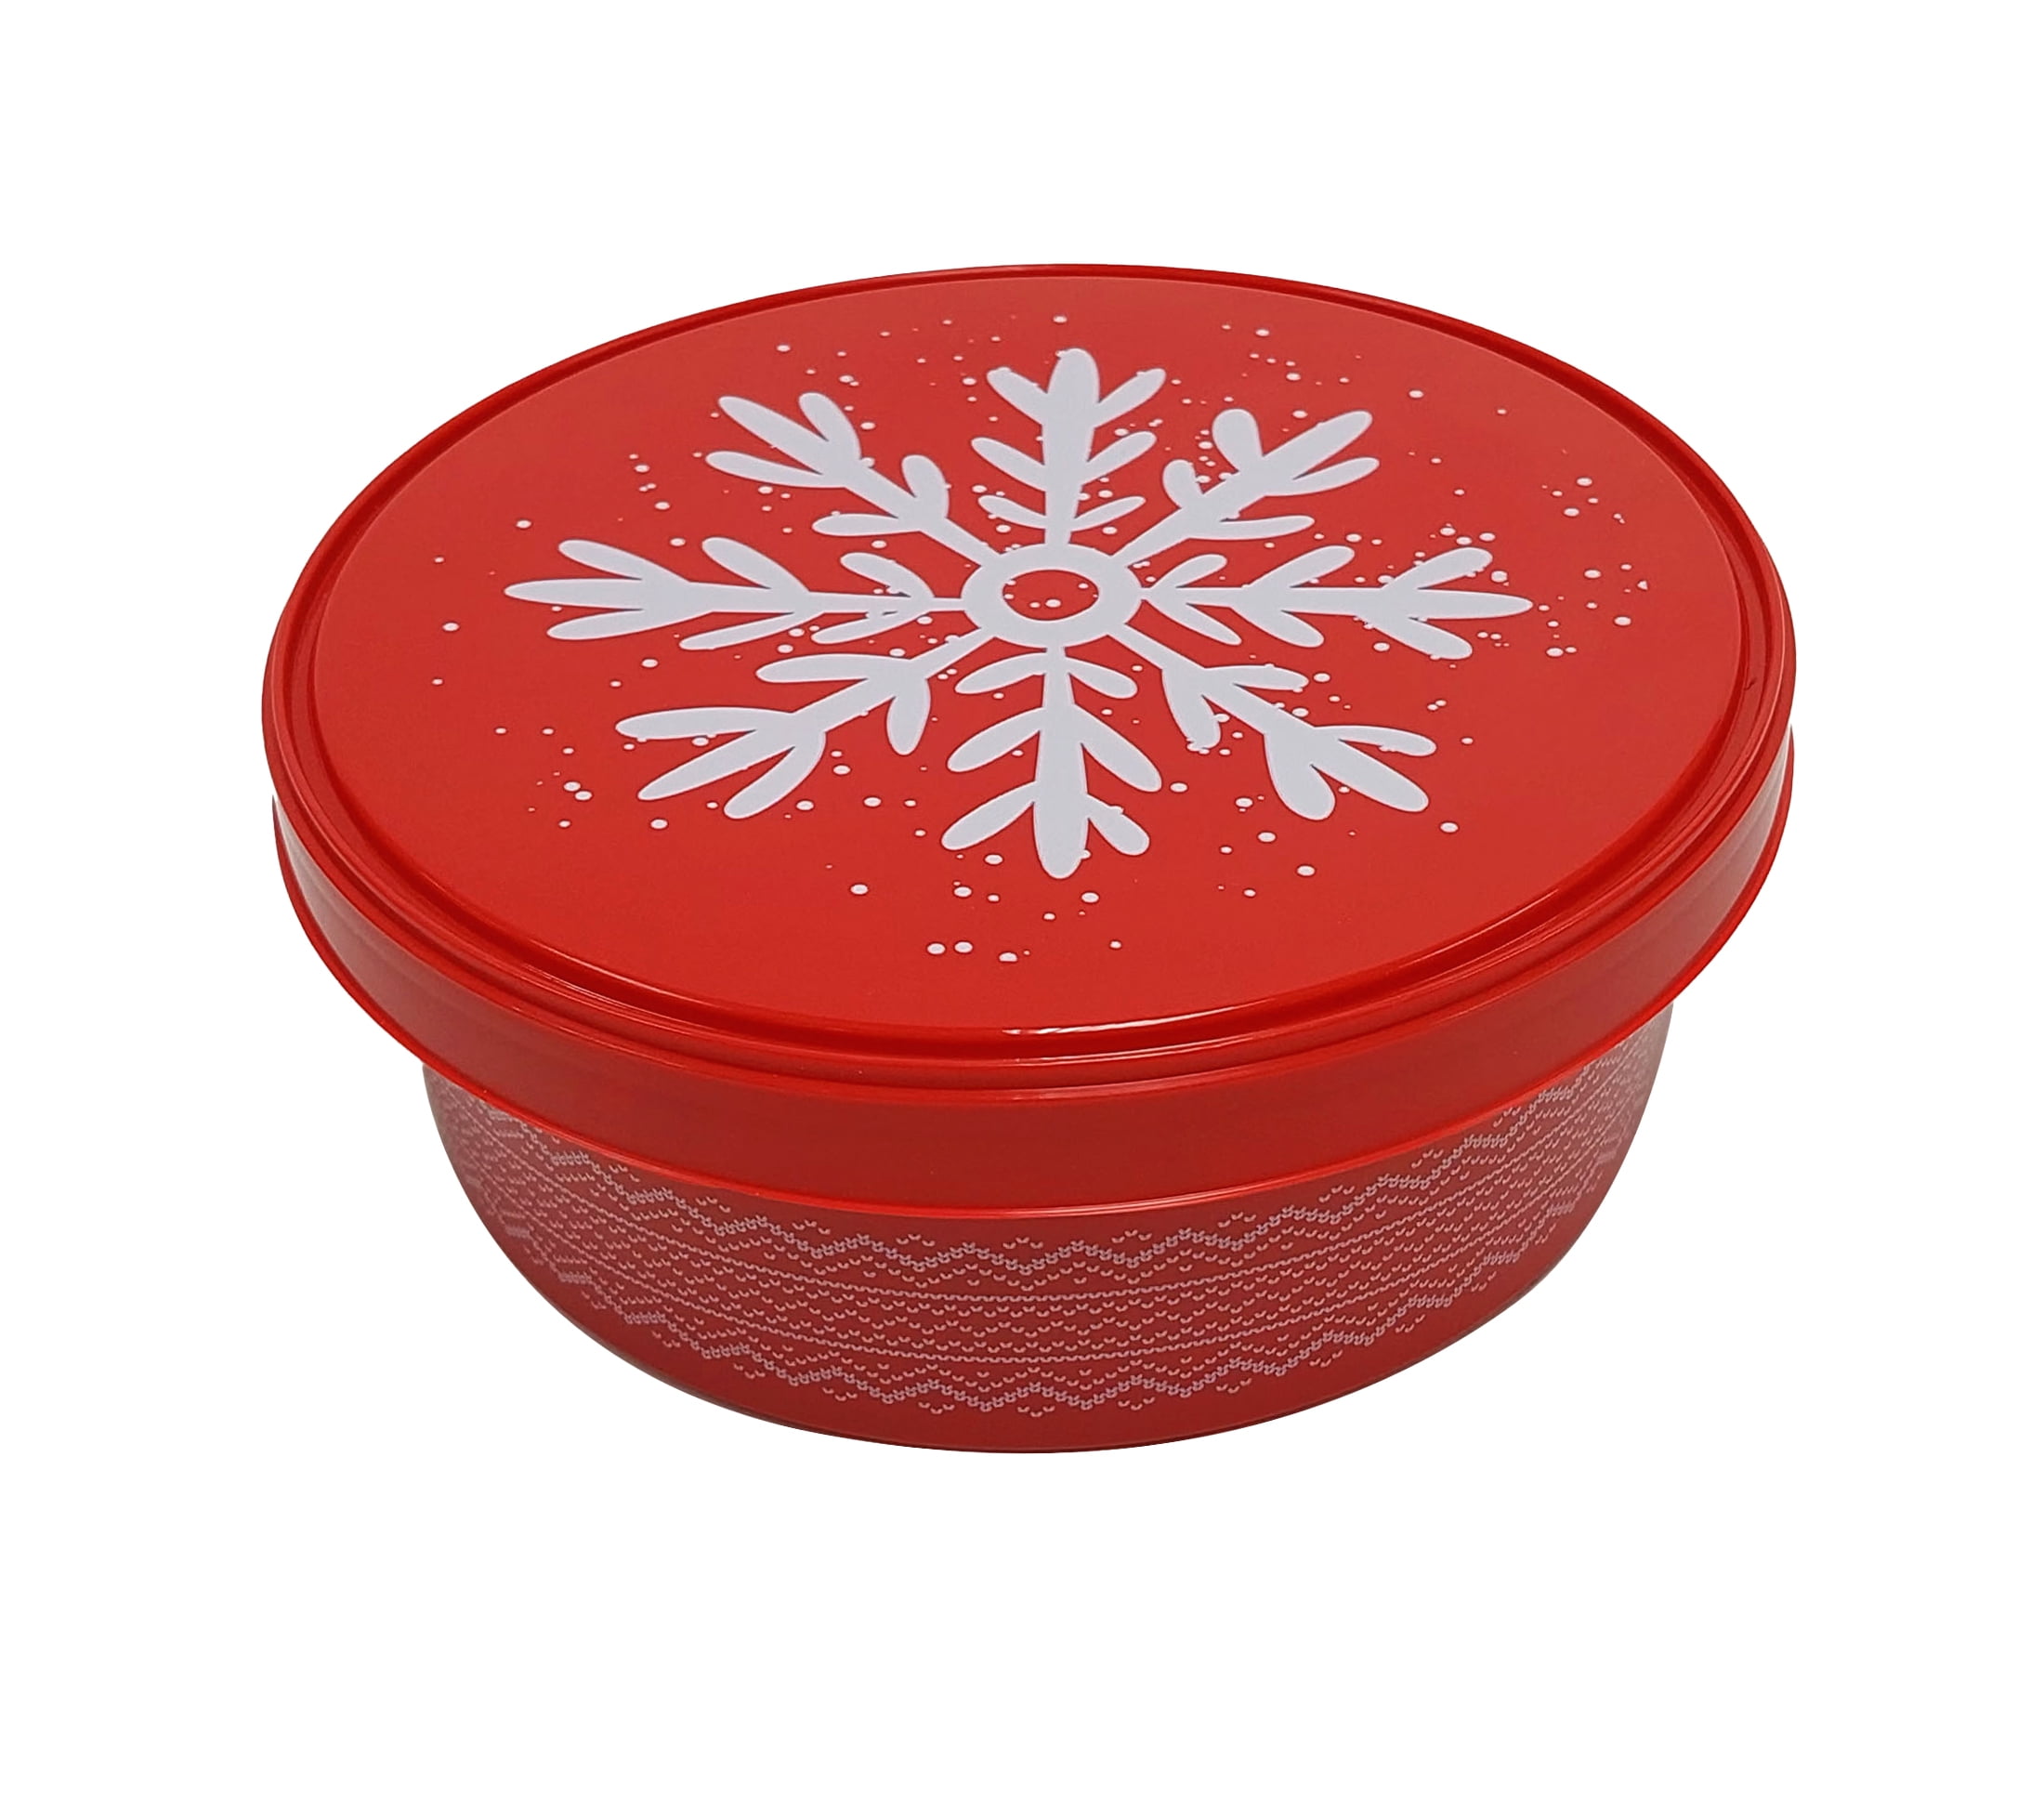 Tupperware 1 Qt White & Red Snowflakes Christmas Canister 7694A RARE